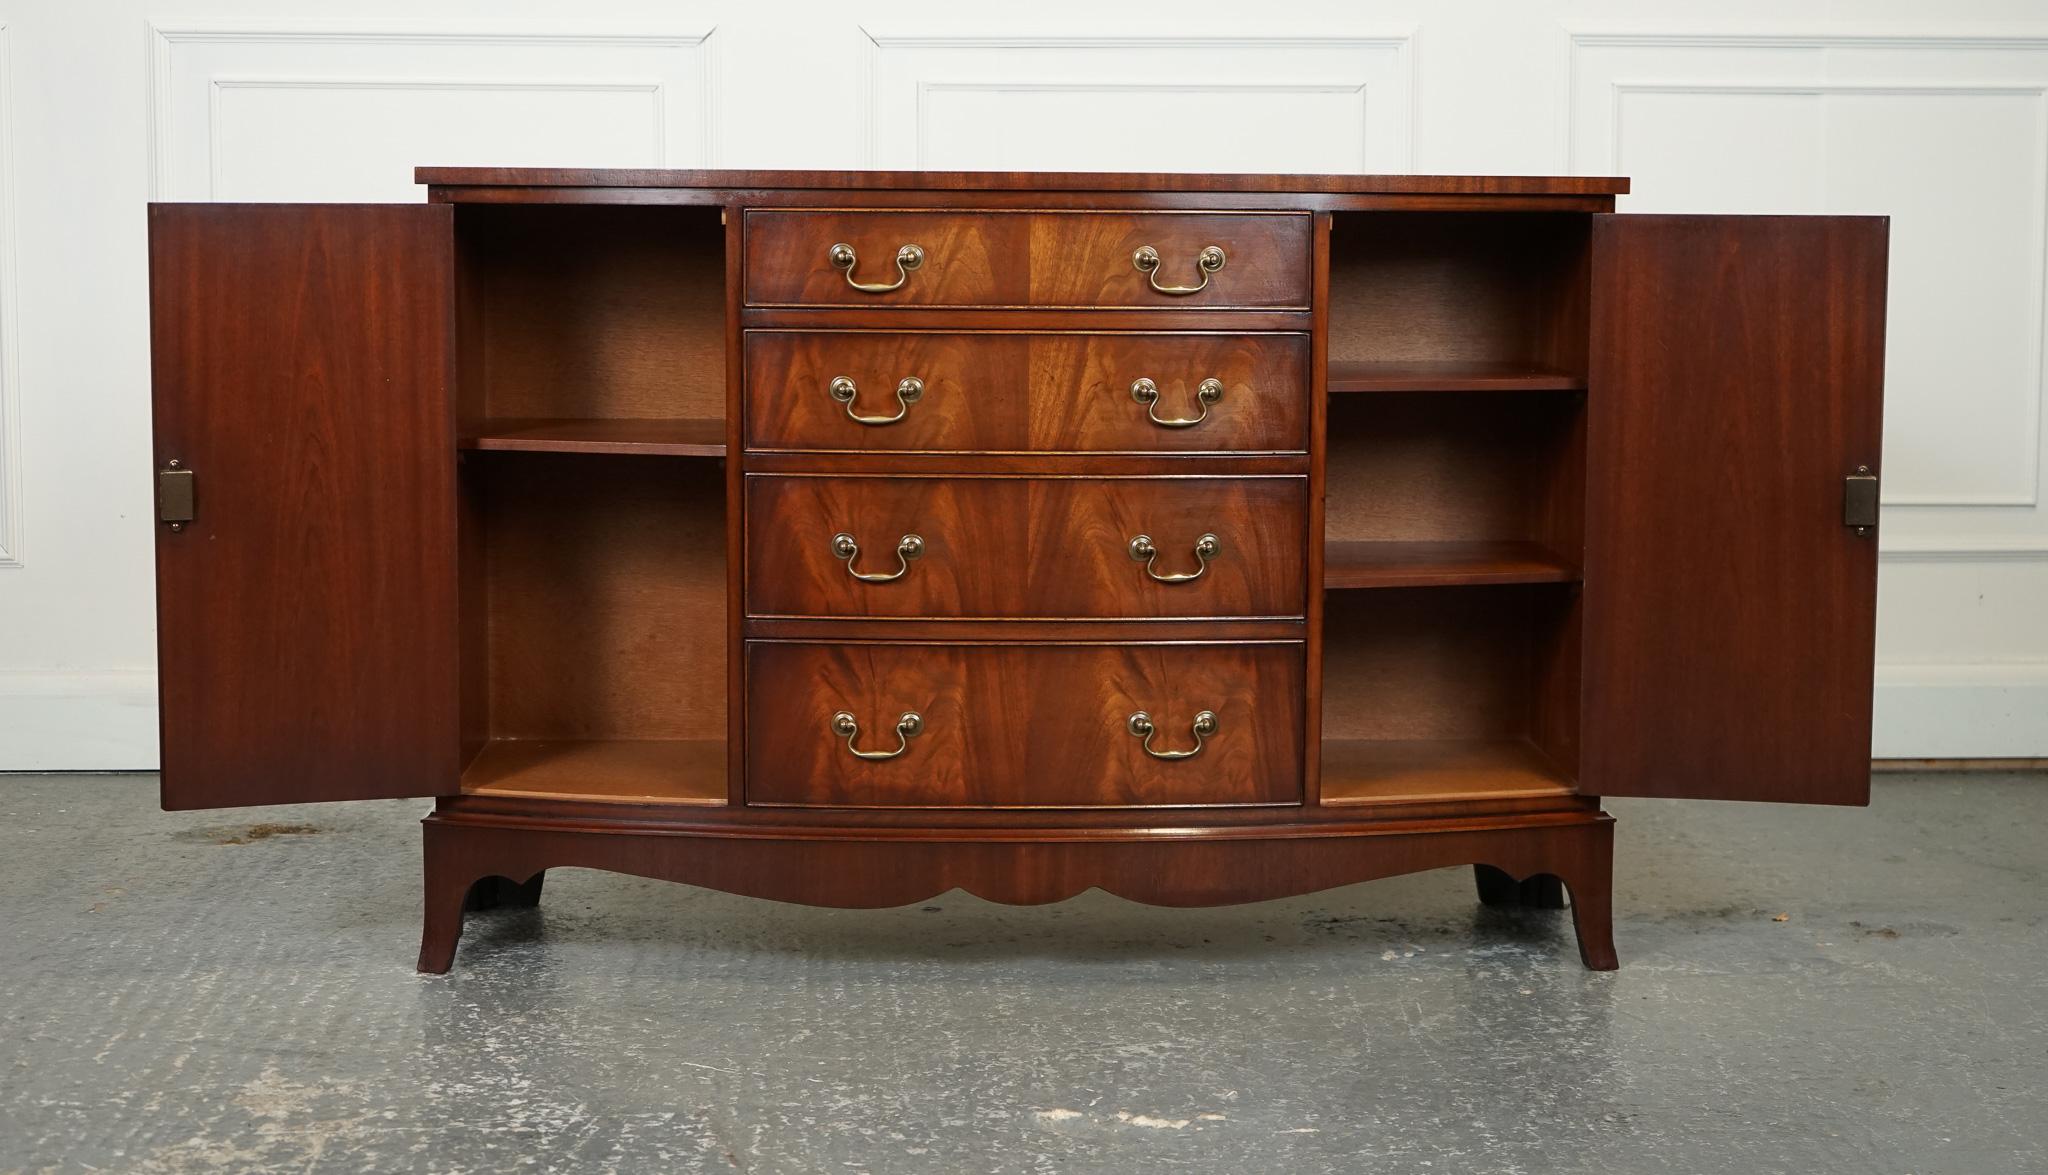 20th Century STUNNING REPRODUX BEVAN FUNNELL SIDEBOARD WiTH DRAWERS J1